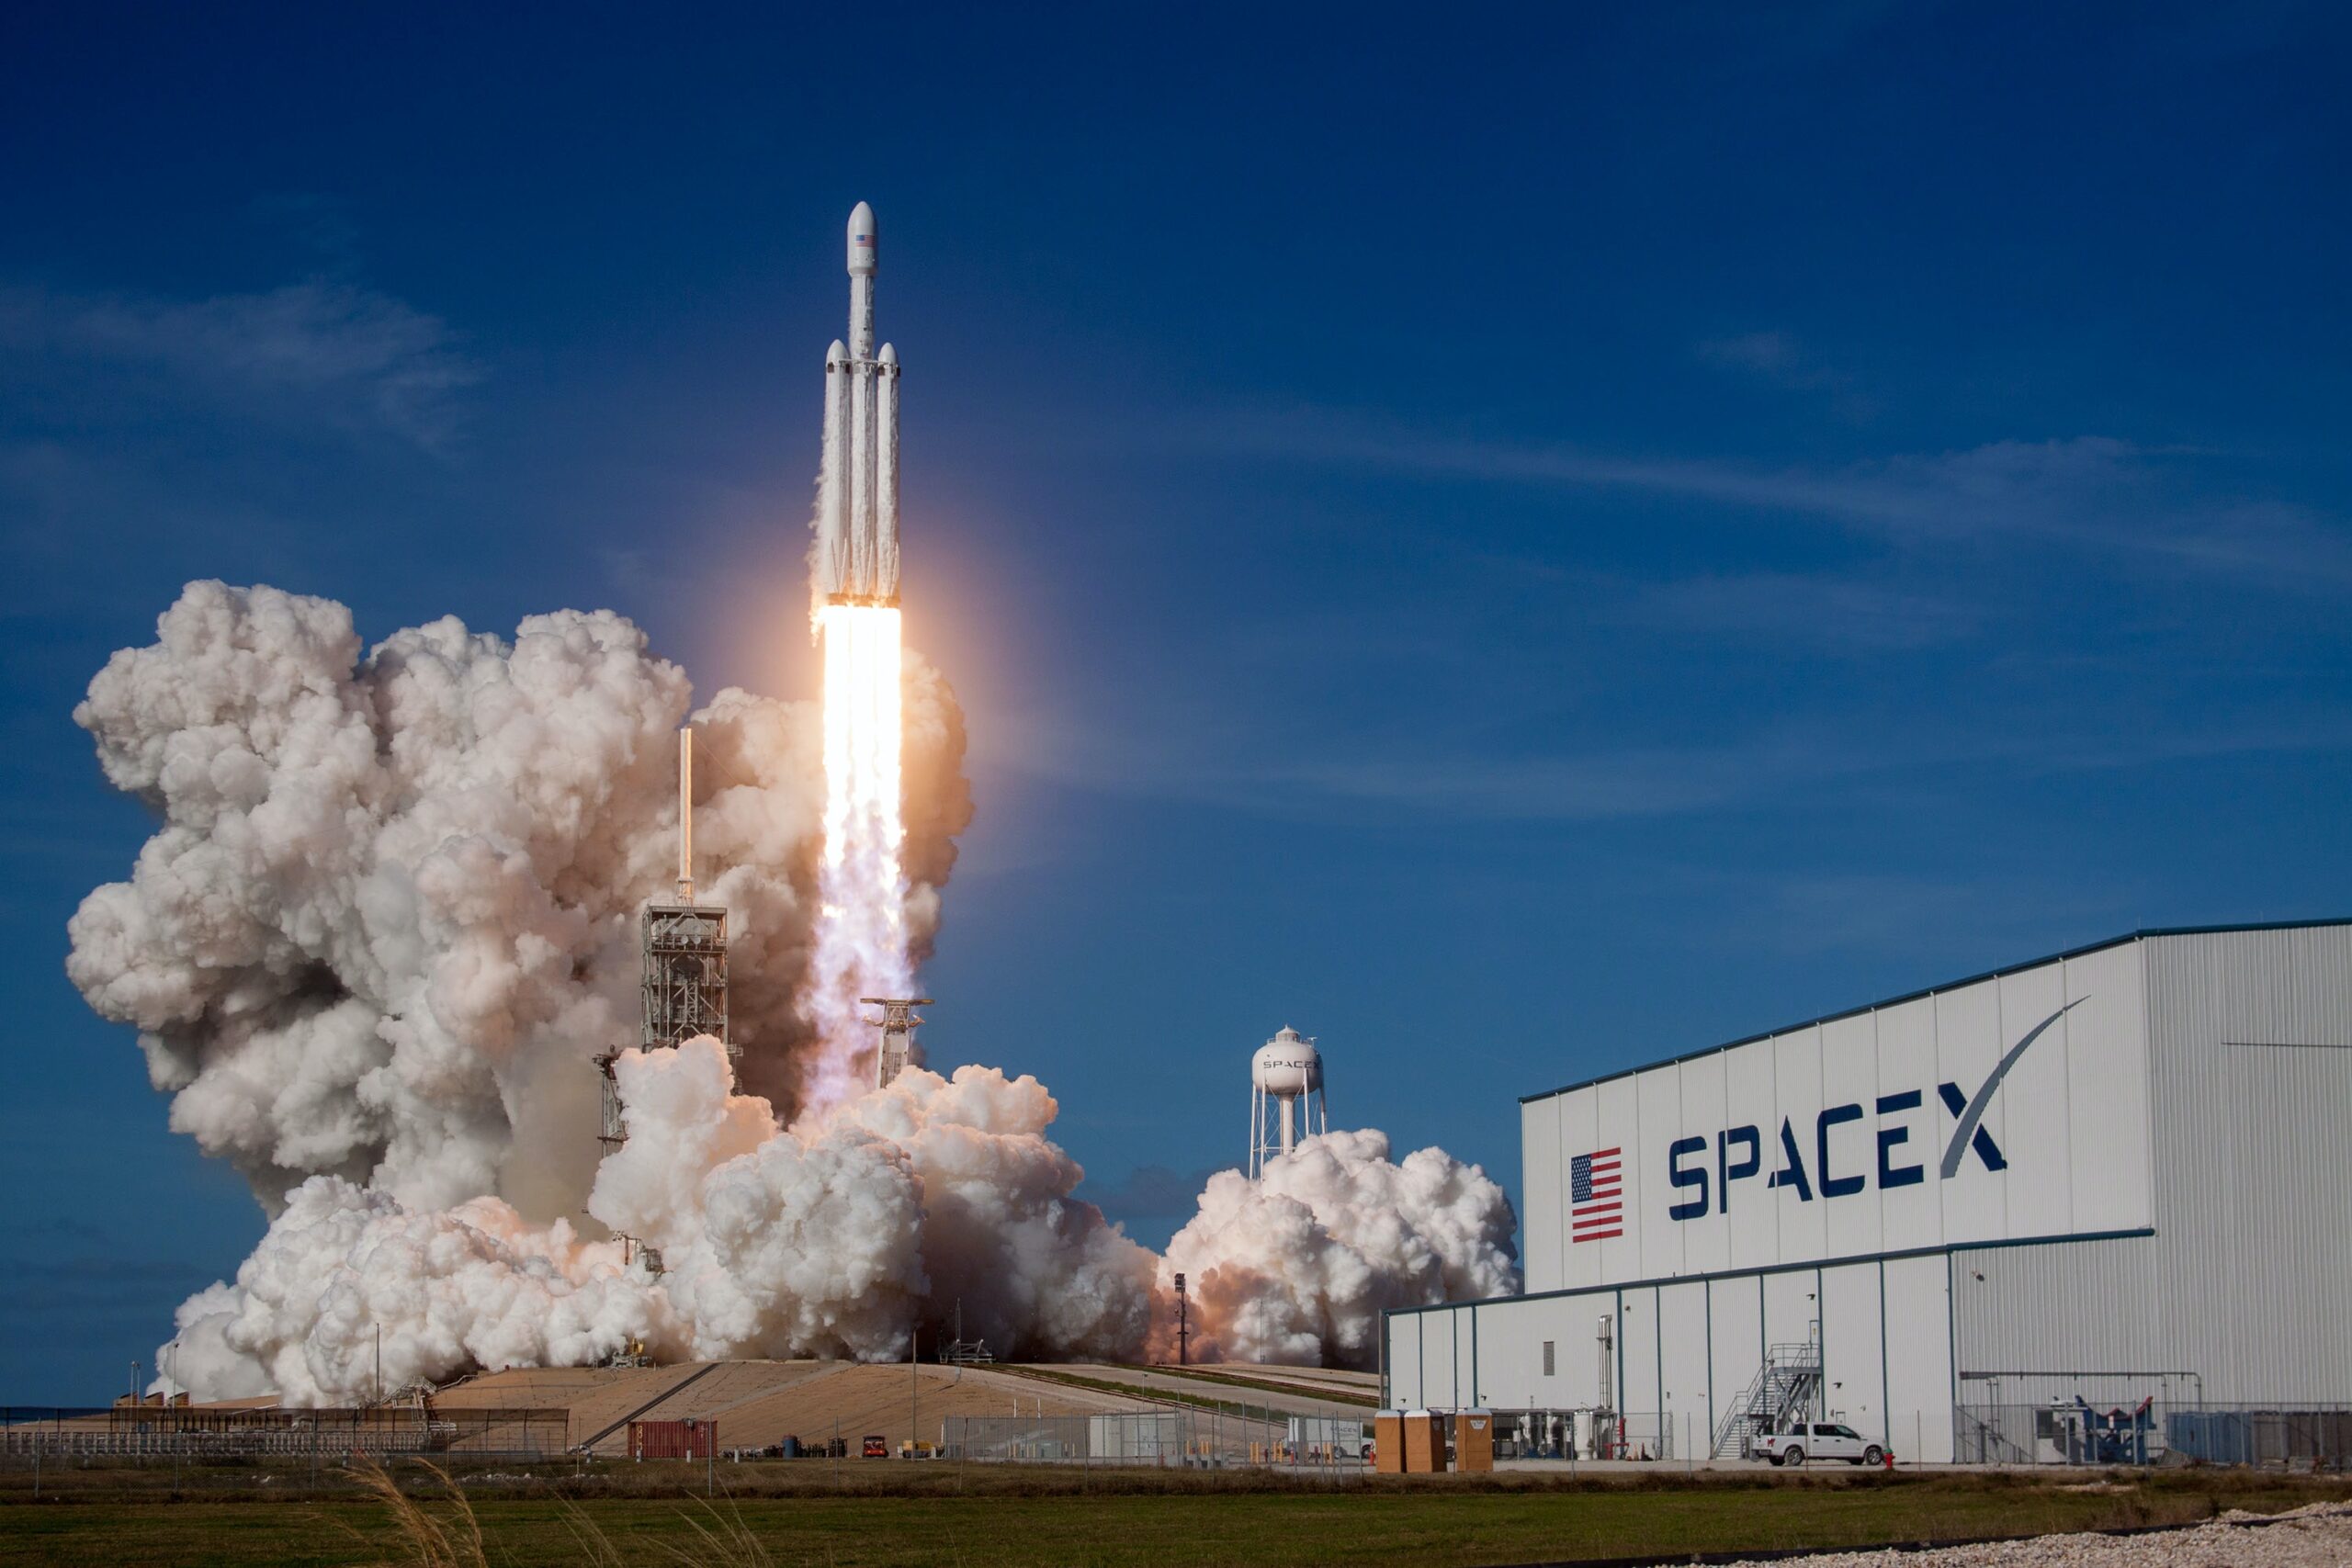 $1 million stolen by scammers promoting fake $SpaceX coin “created” by Elon Musk